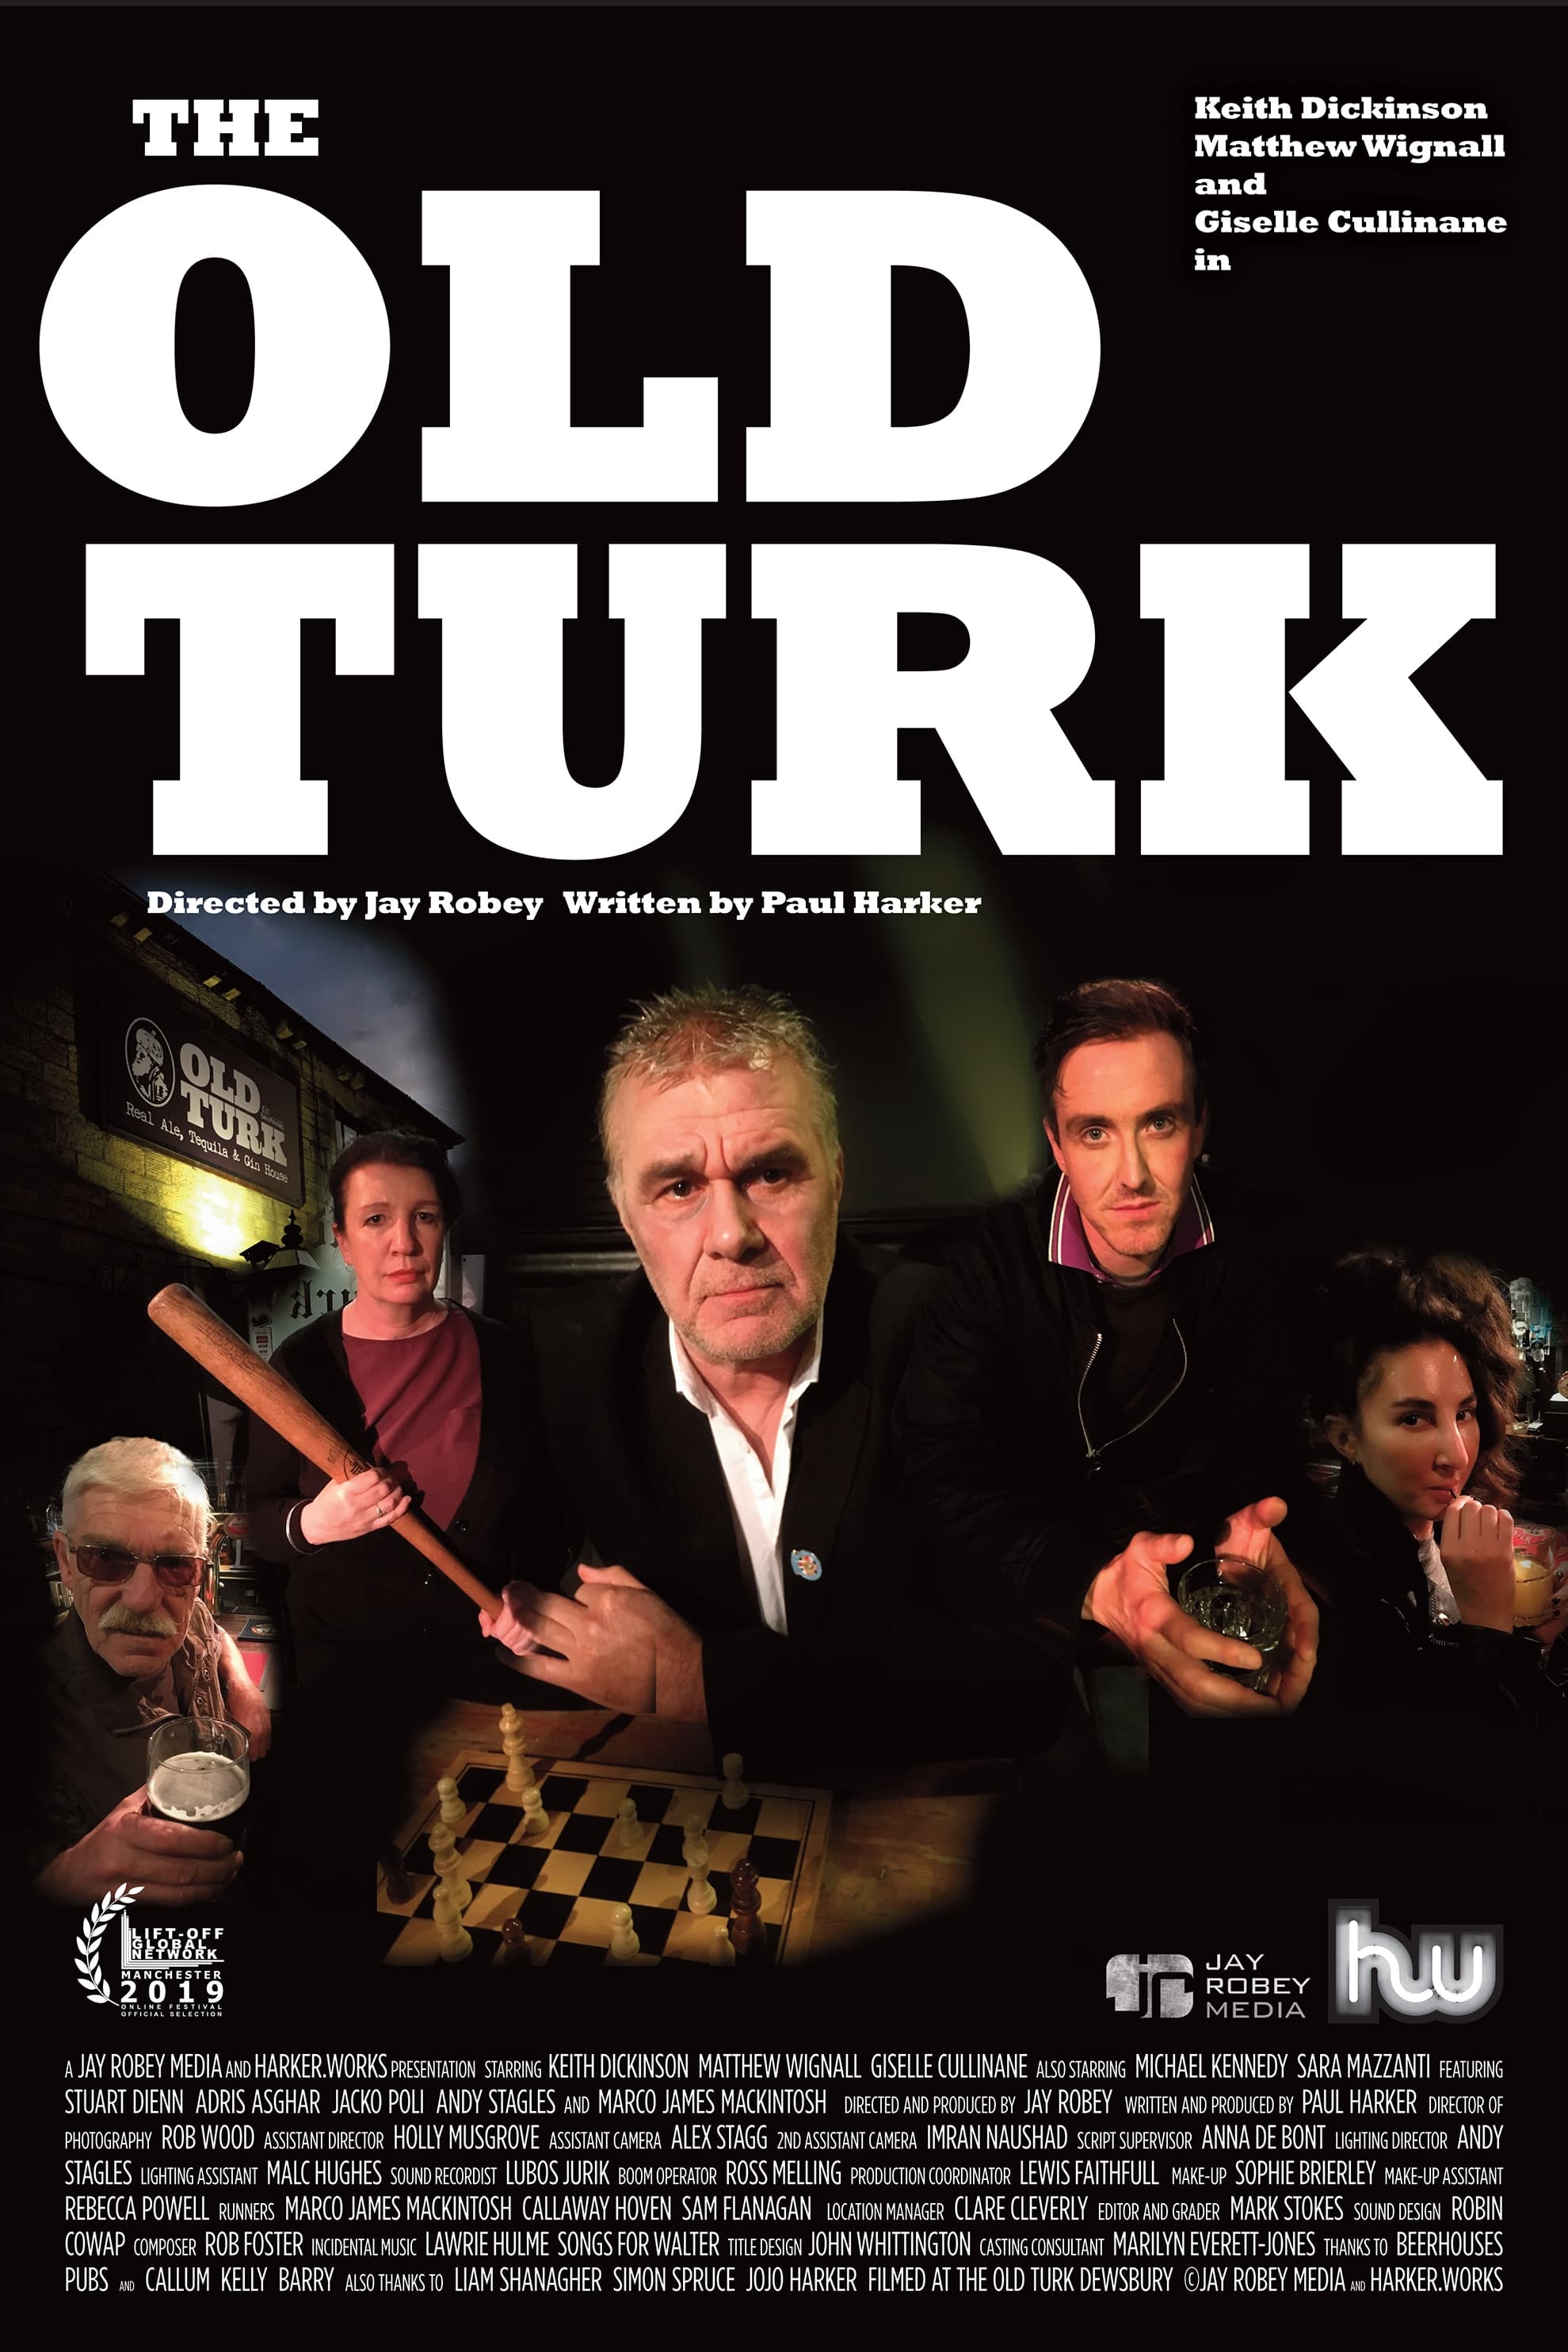 The Old Turk